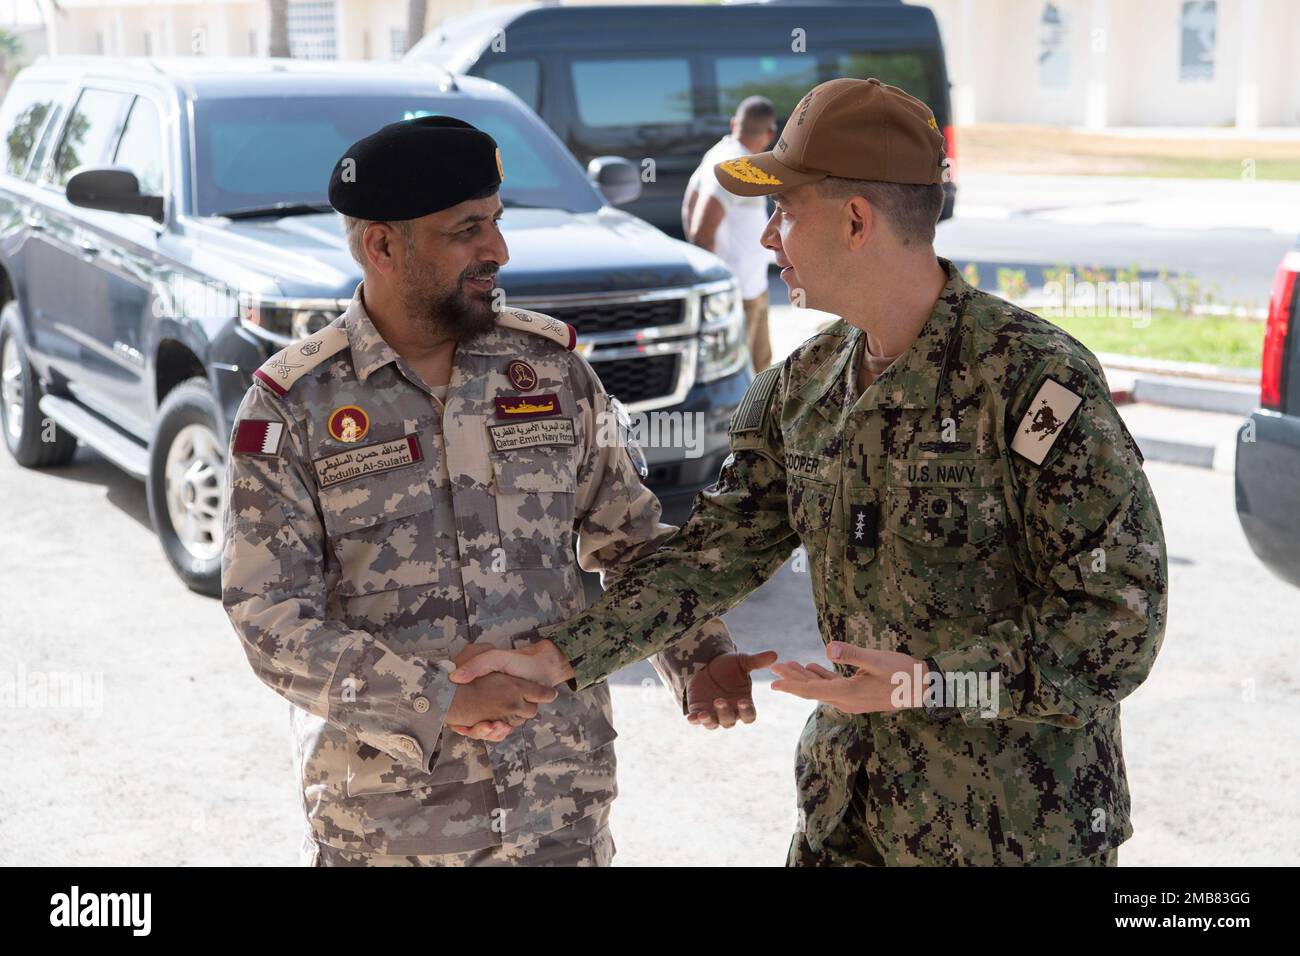 220613-N-ZA692-1012 DOHA, Qatar (June 13, 2022) Vice Adm. Brad Cooper, commander of U.S. Naval Forces Central Command, U.S. 5th Fleet and Combined Maritime Forces, is greeted by Staff Maj. Gen. (Navy) Abdulla Hassan Al-Sulaiti, commander of Qatar Emiri Naval Forces, during a visit to Qatar’s naval headquarters in Doha, Qatar, June 13. Stock Photo